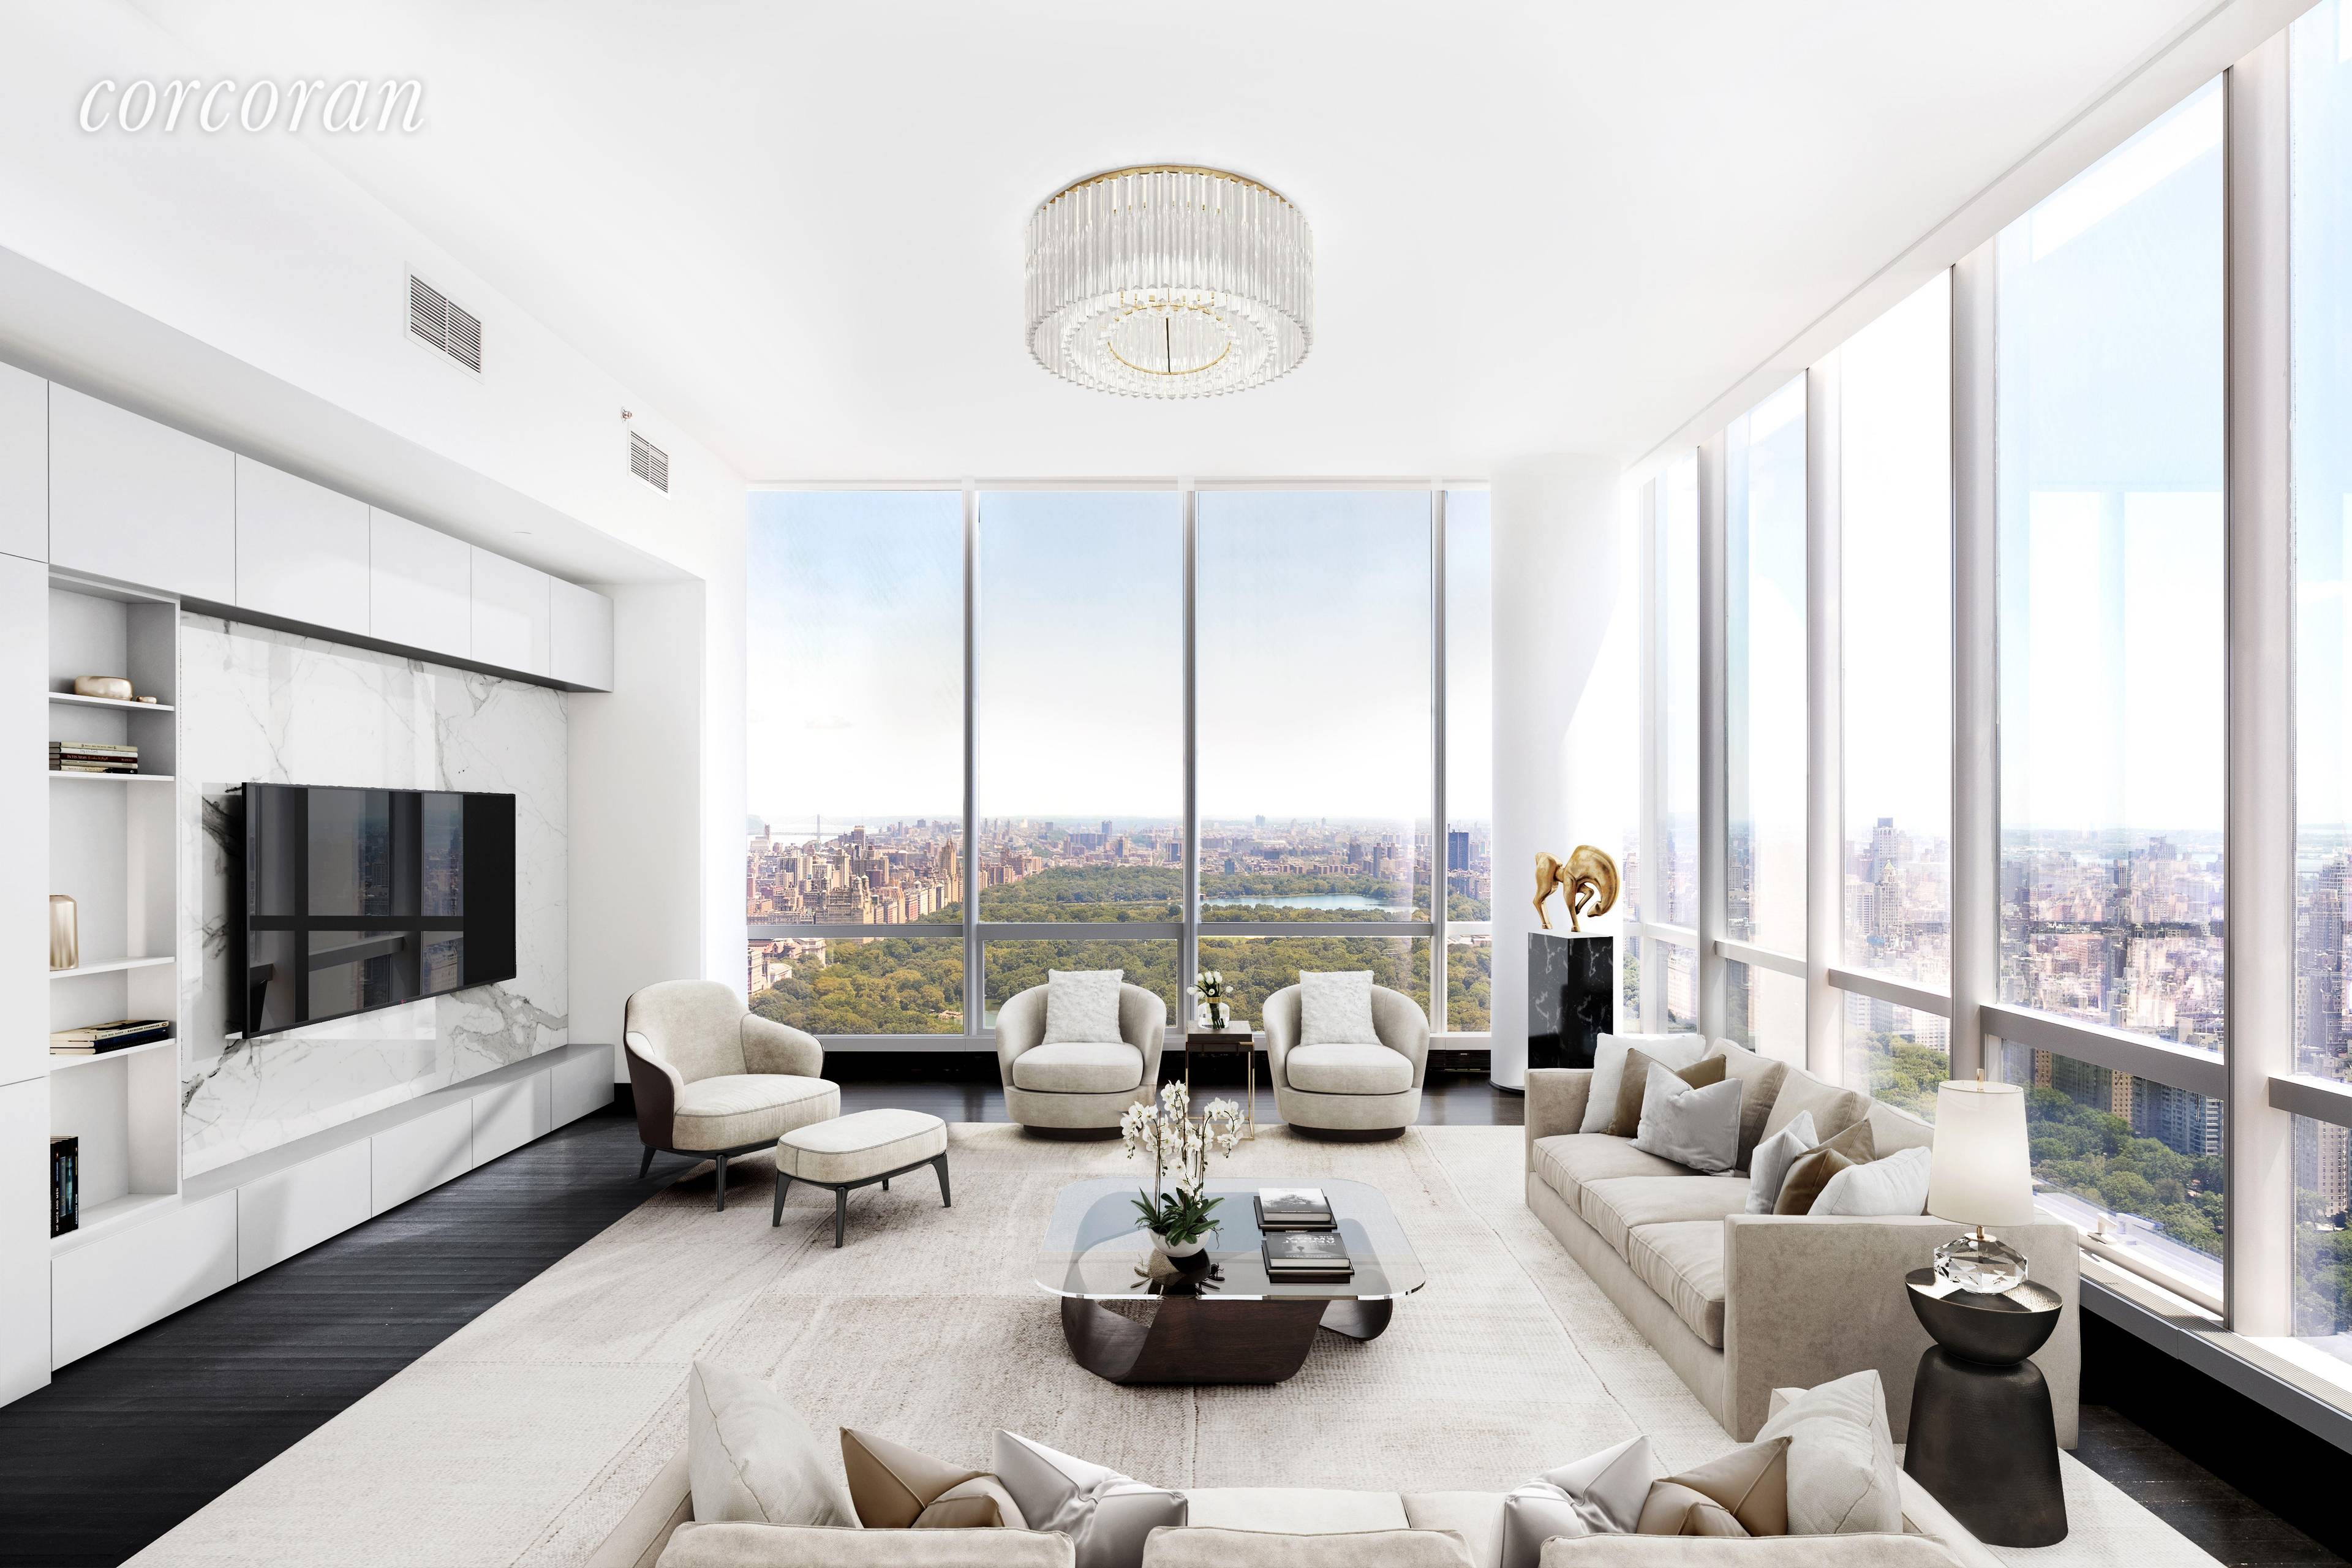 Residence 56C at One57Incomparable Central Park and Skyline Views Highest C Line in the Building Four Bedrooms Four Baths Powder Room 3, 466 sqft This 56th floor C line residence ...